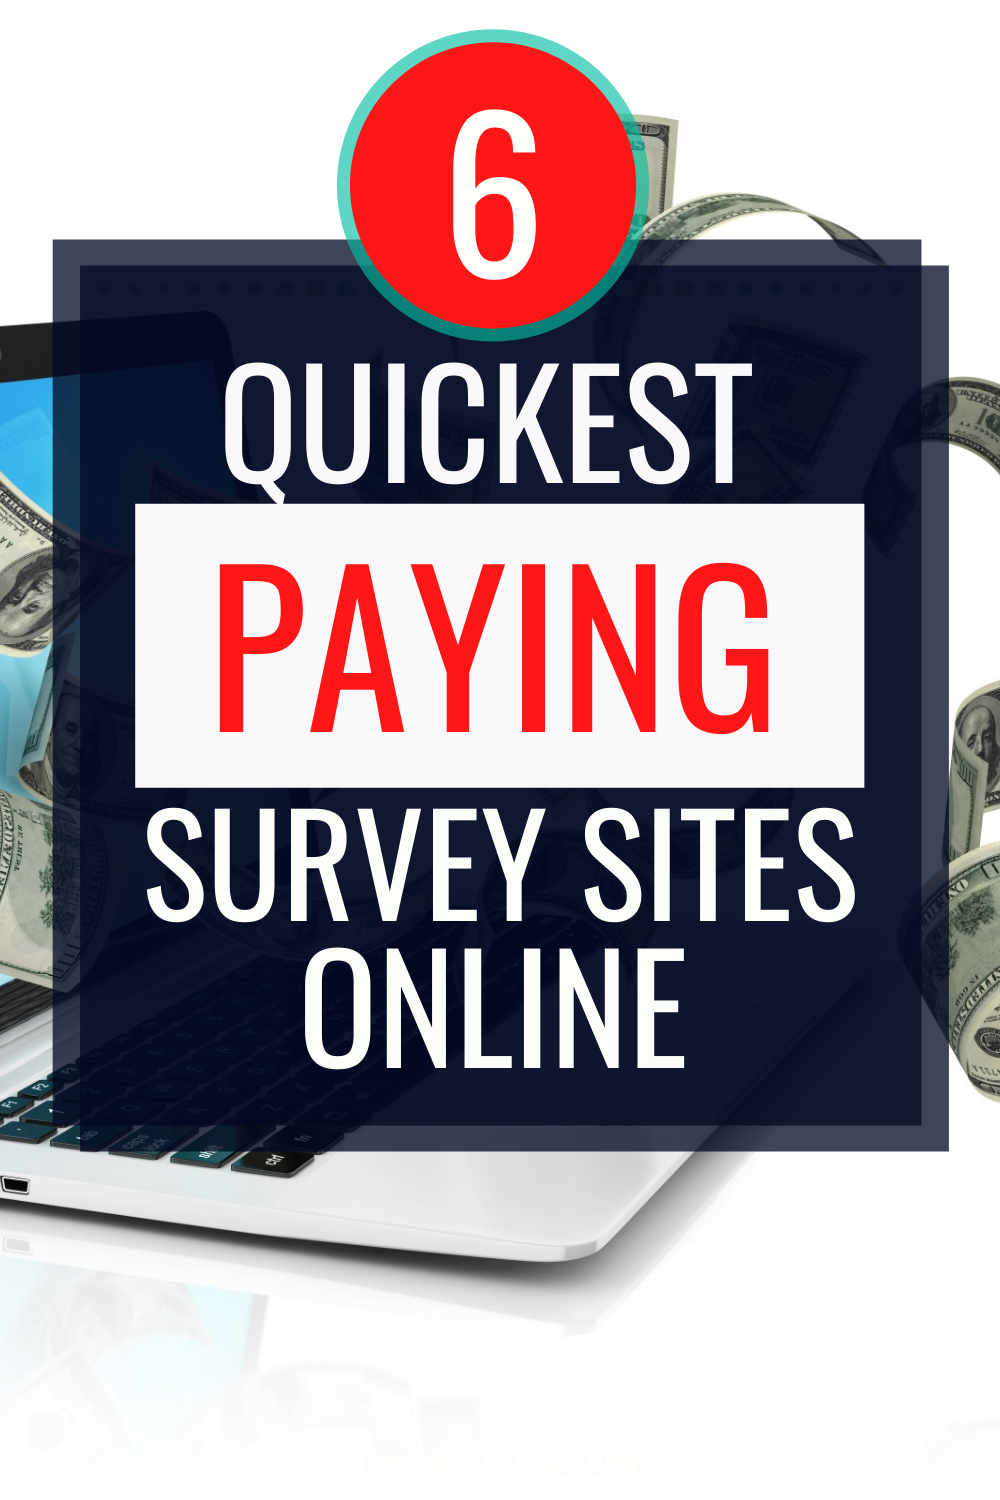 Quickest paying survey sites online